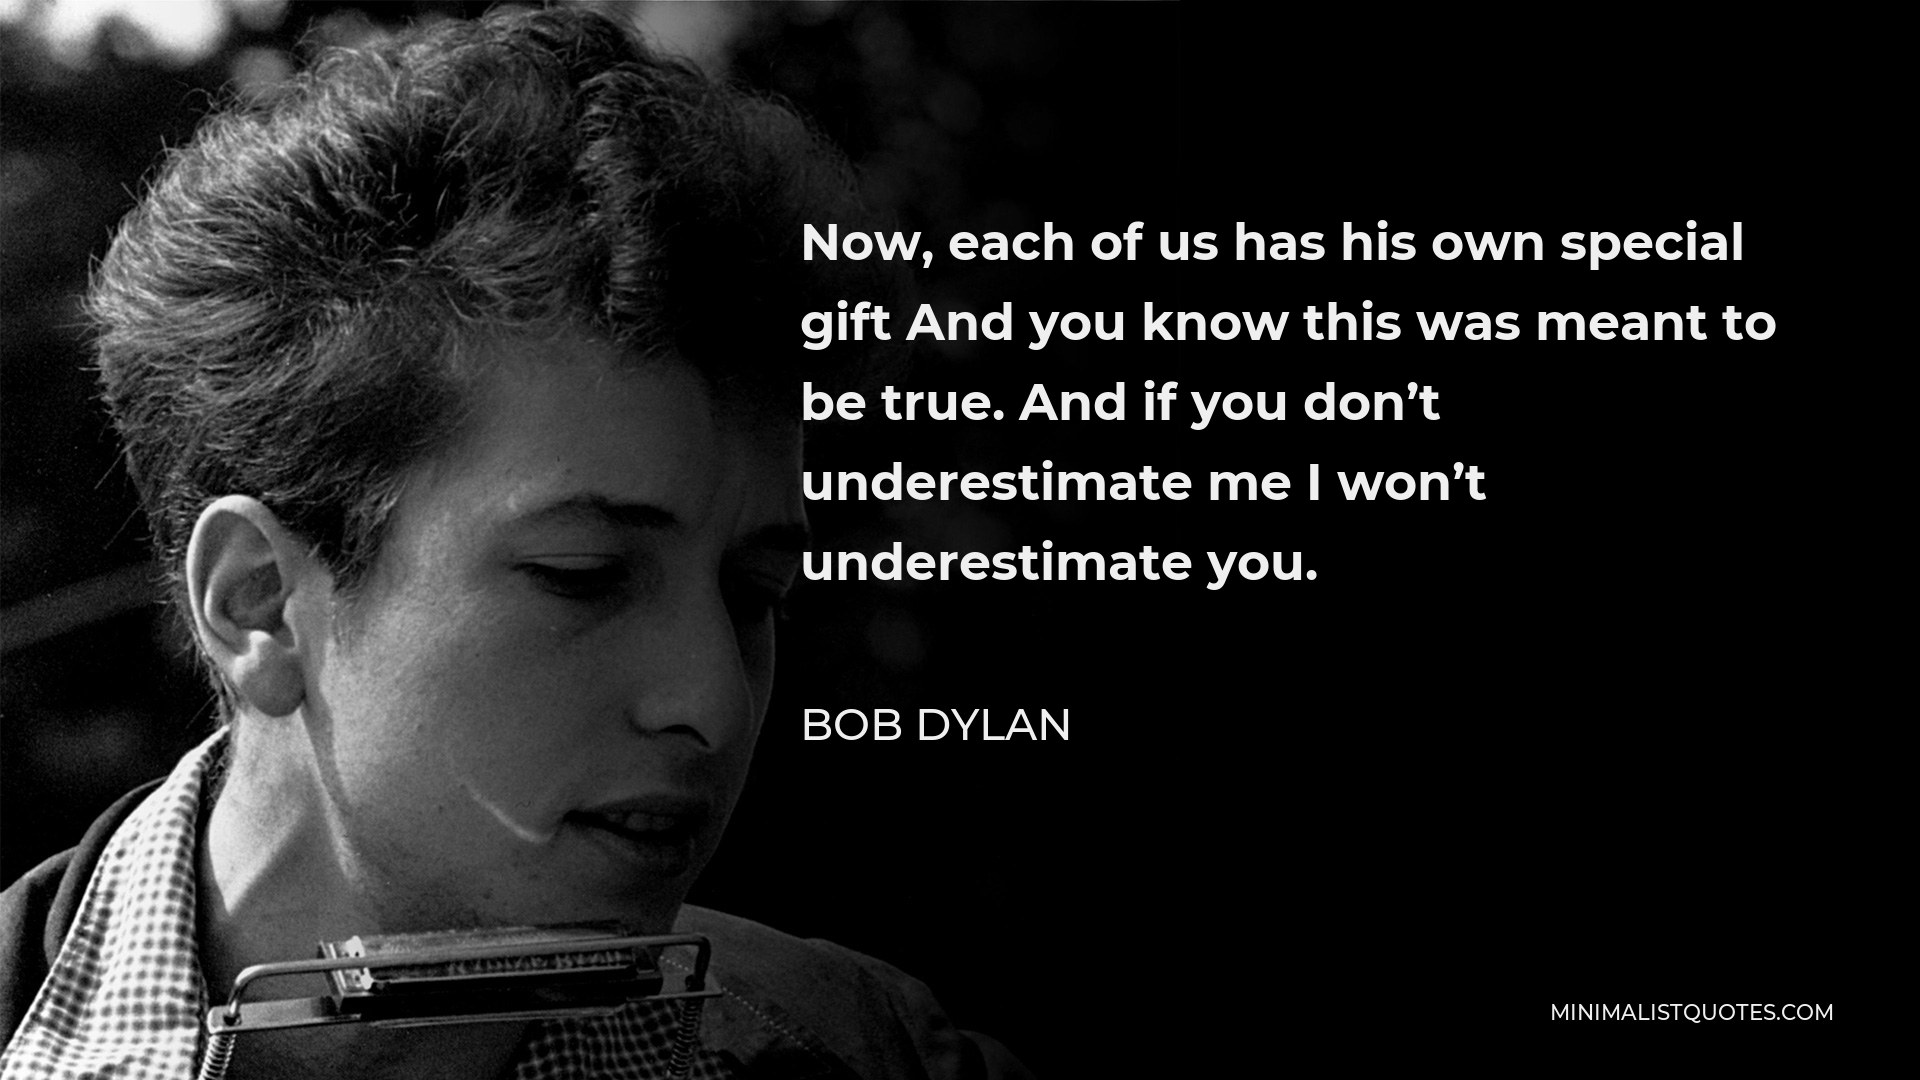 Bob Dylan Quote - Now, each of us has his own special gift And you know this was meant to be true. And if you don’t underestimate me I won’t underestimate you.